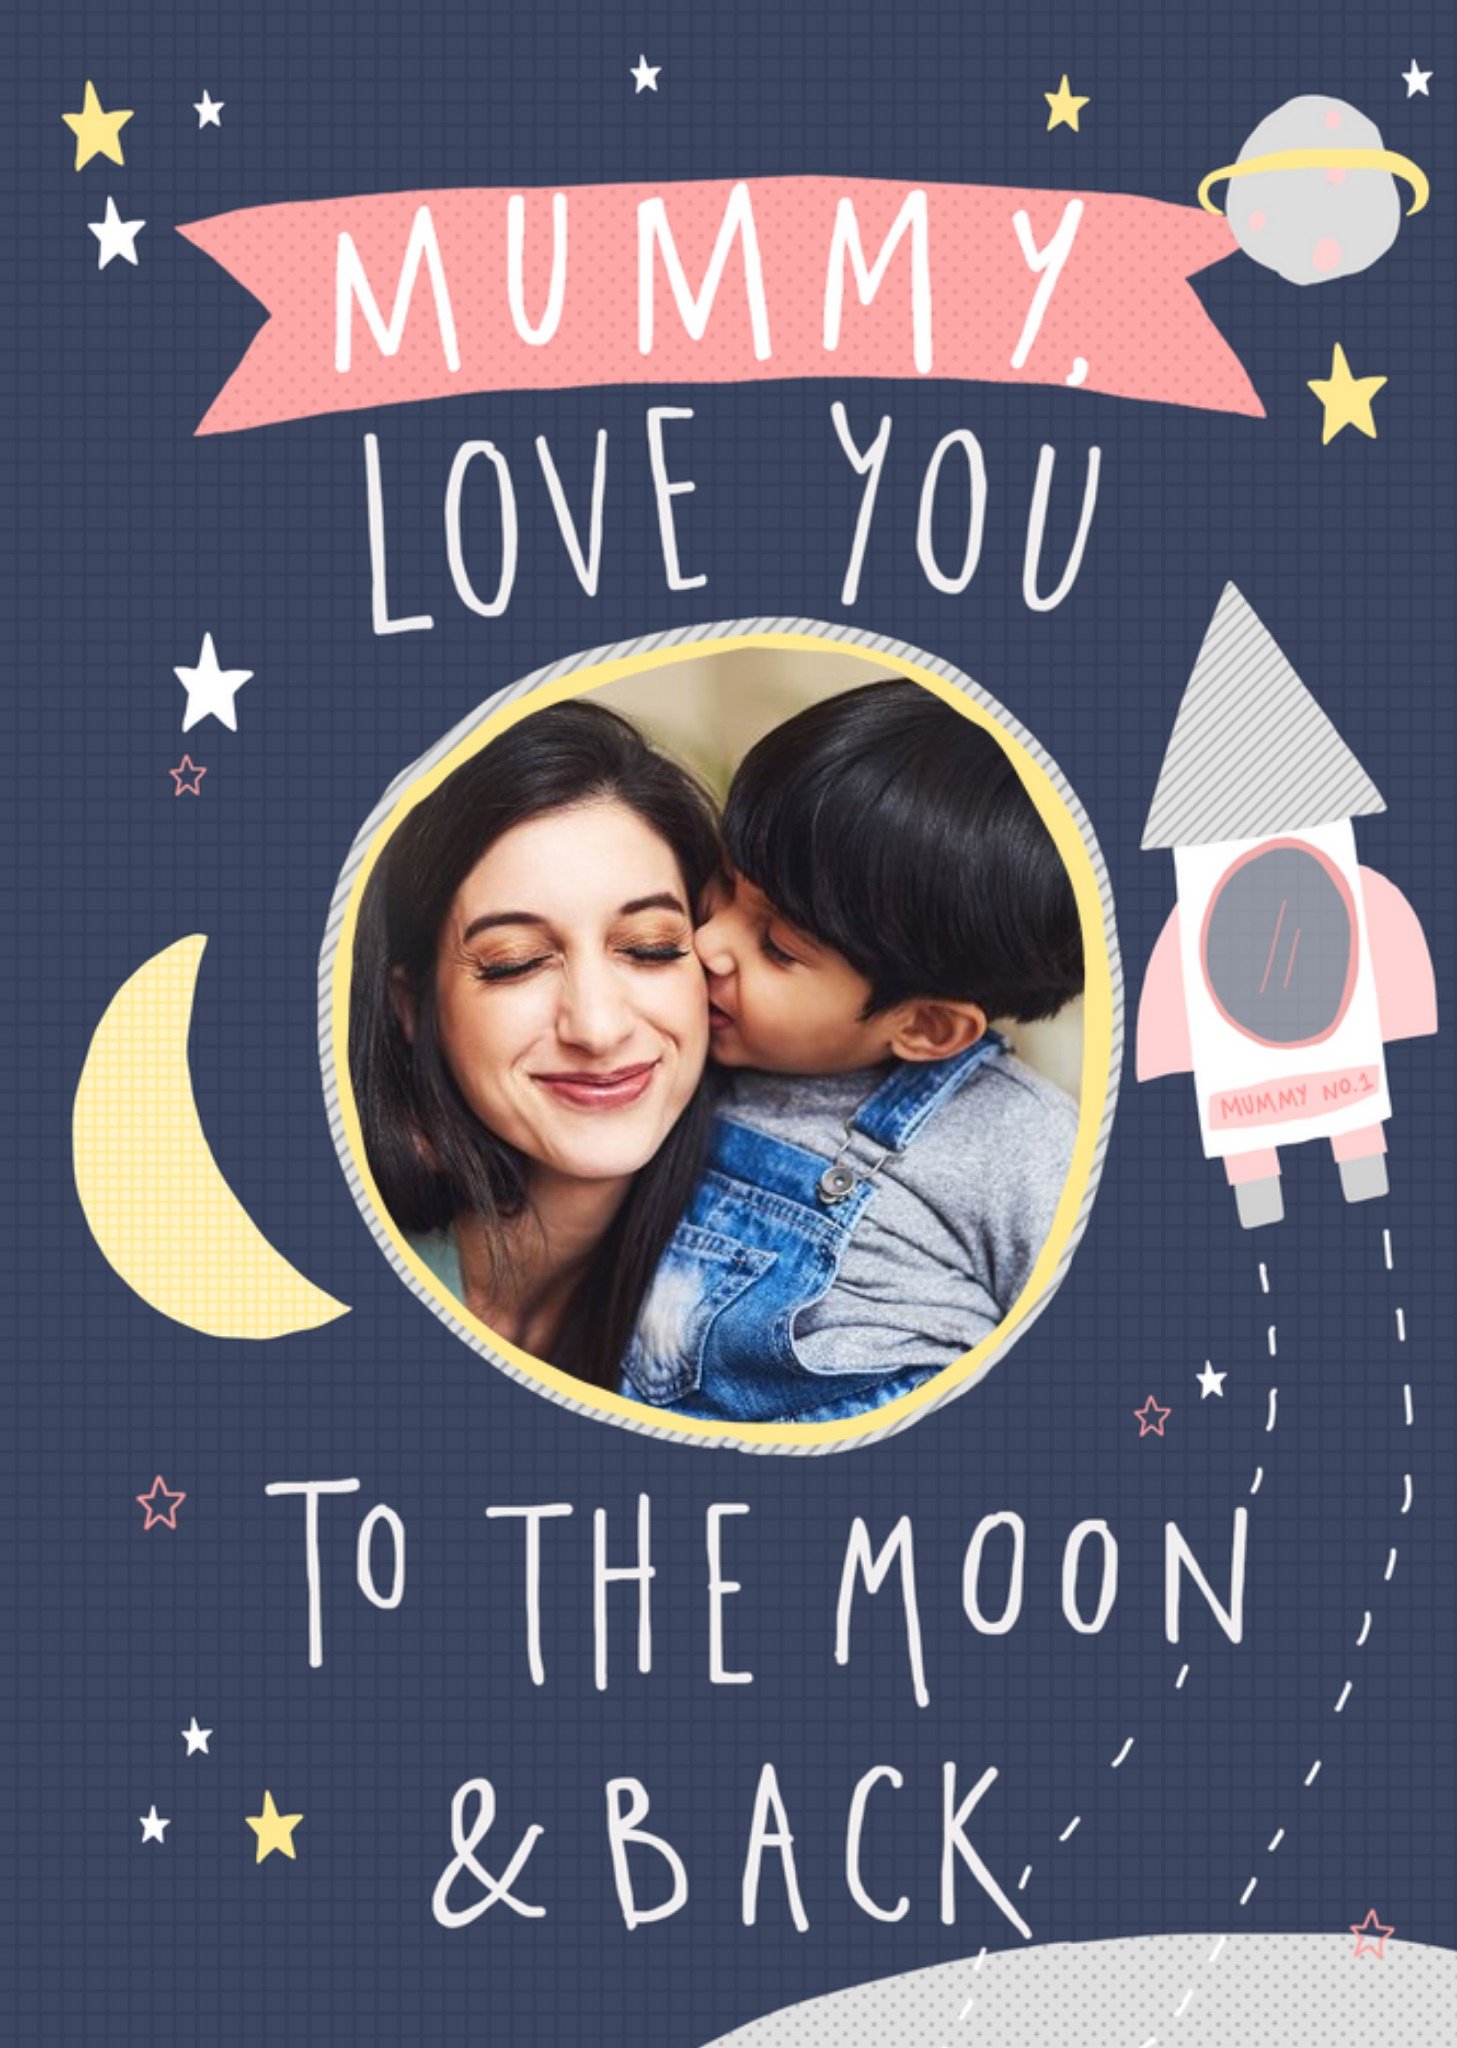 Moonpig Mother's Day Card - Mummy - Moon And Back - Photo Upload Card Ecard